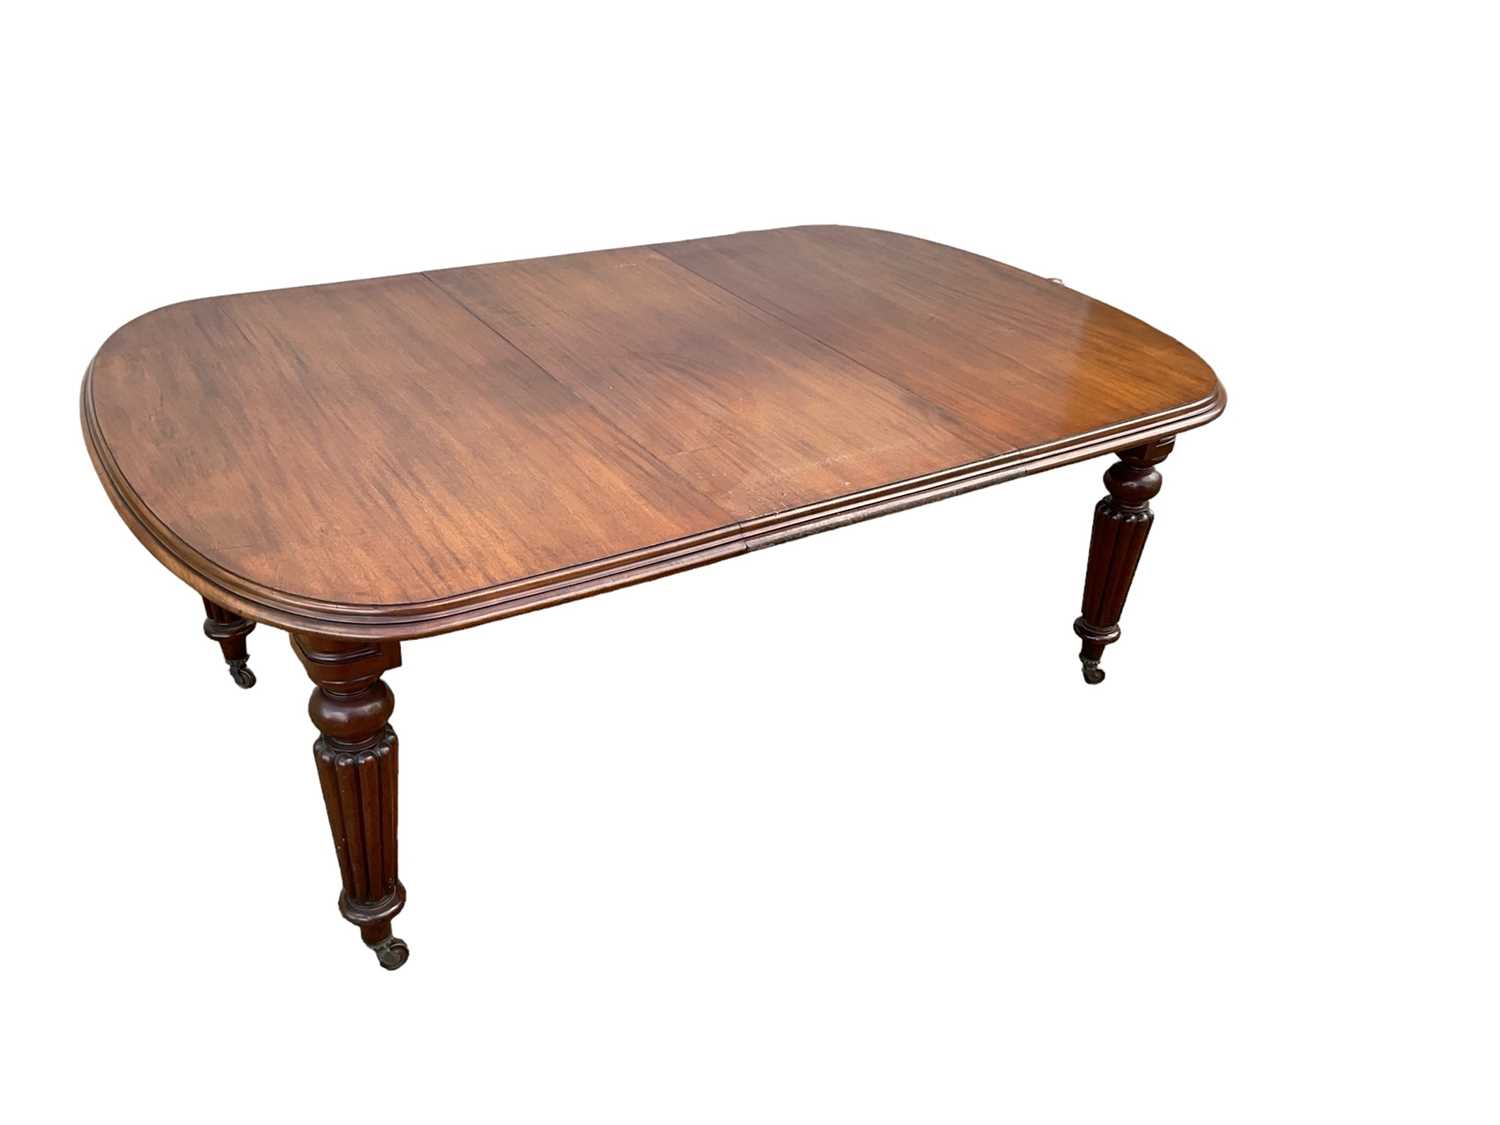 Victorian mahogany extending dining table with extra leaf on turned and reeded legs with winding han - Image 3 of 4